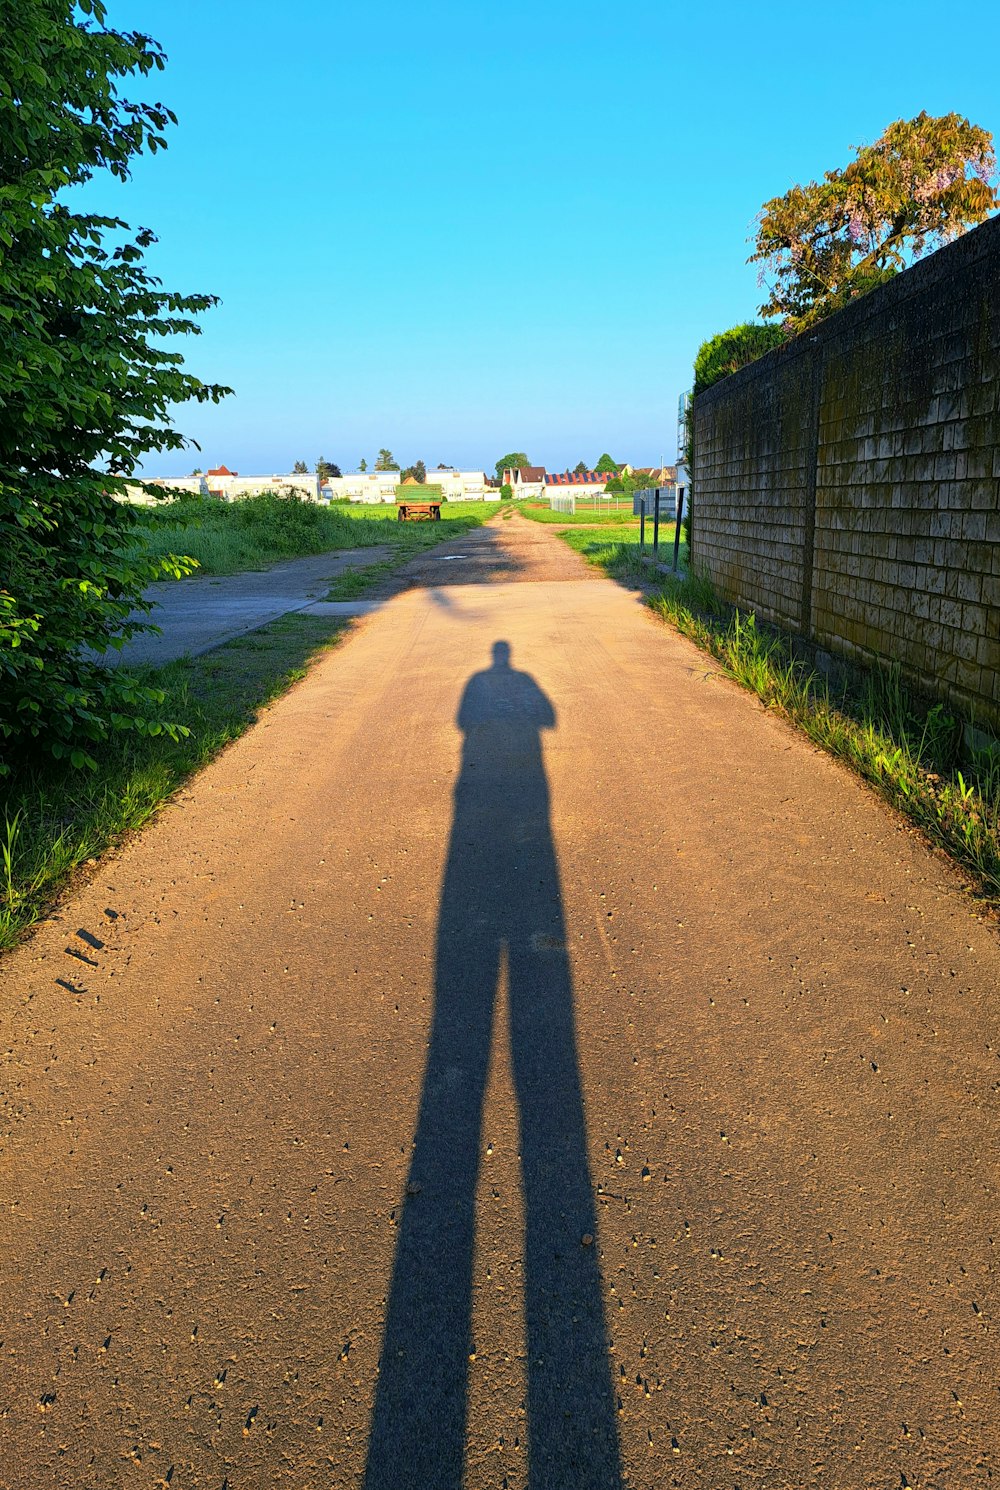 a shadow of a person standing on a dirt road